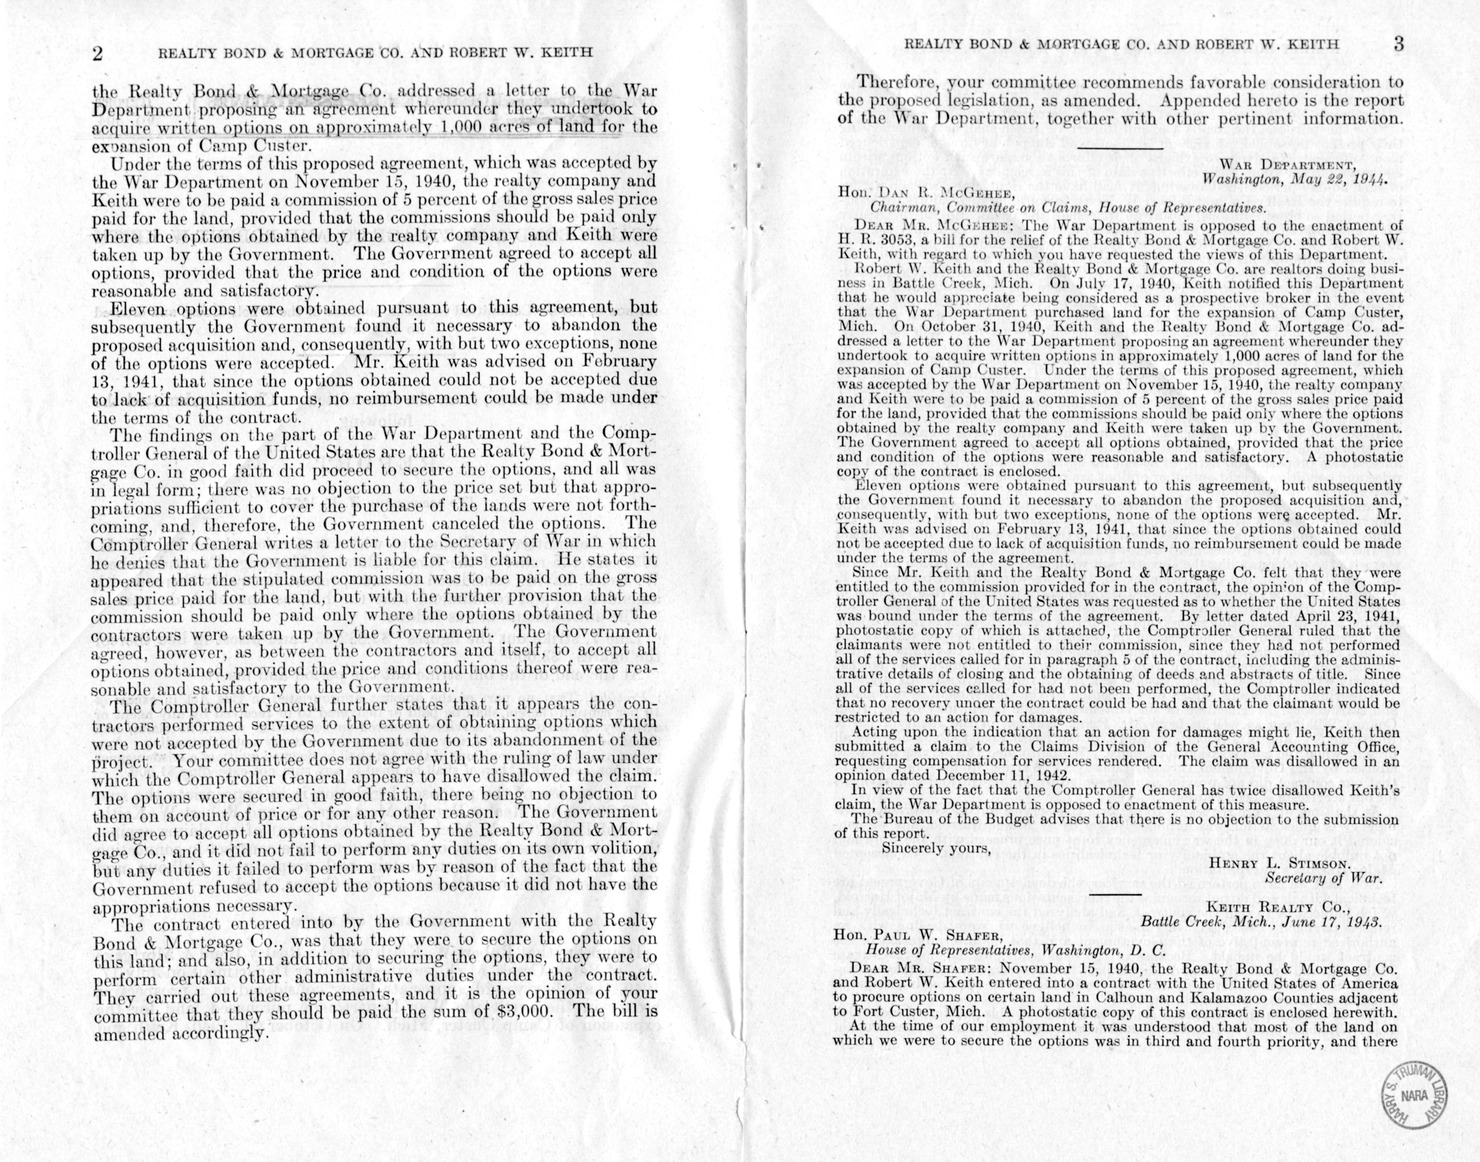 Memorandum from Harold D. Smith to M. C. Latta, H. R. 1055, for the Relief of the Realty Bond and Mortgage Company and Robert W. Keith, with Attachments